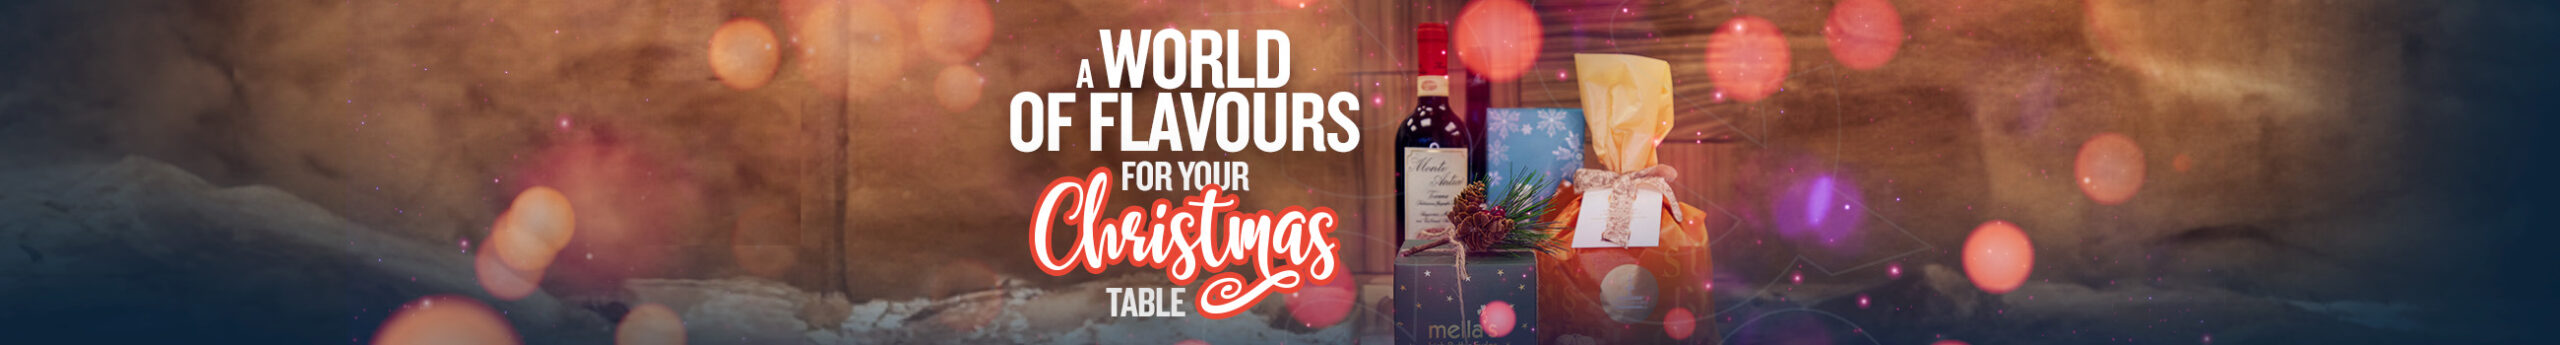 A World of flavours for your Christmas Table